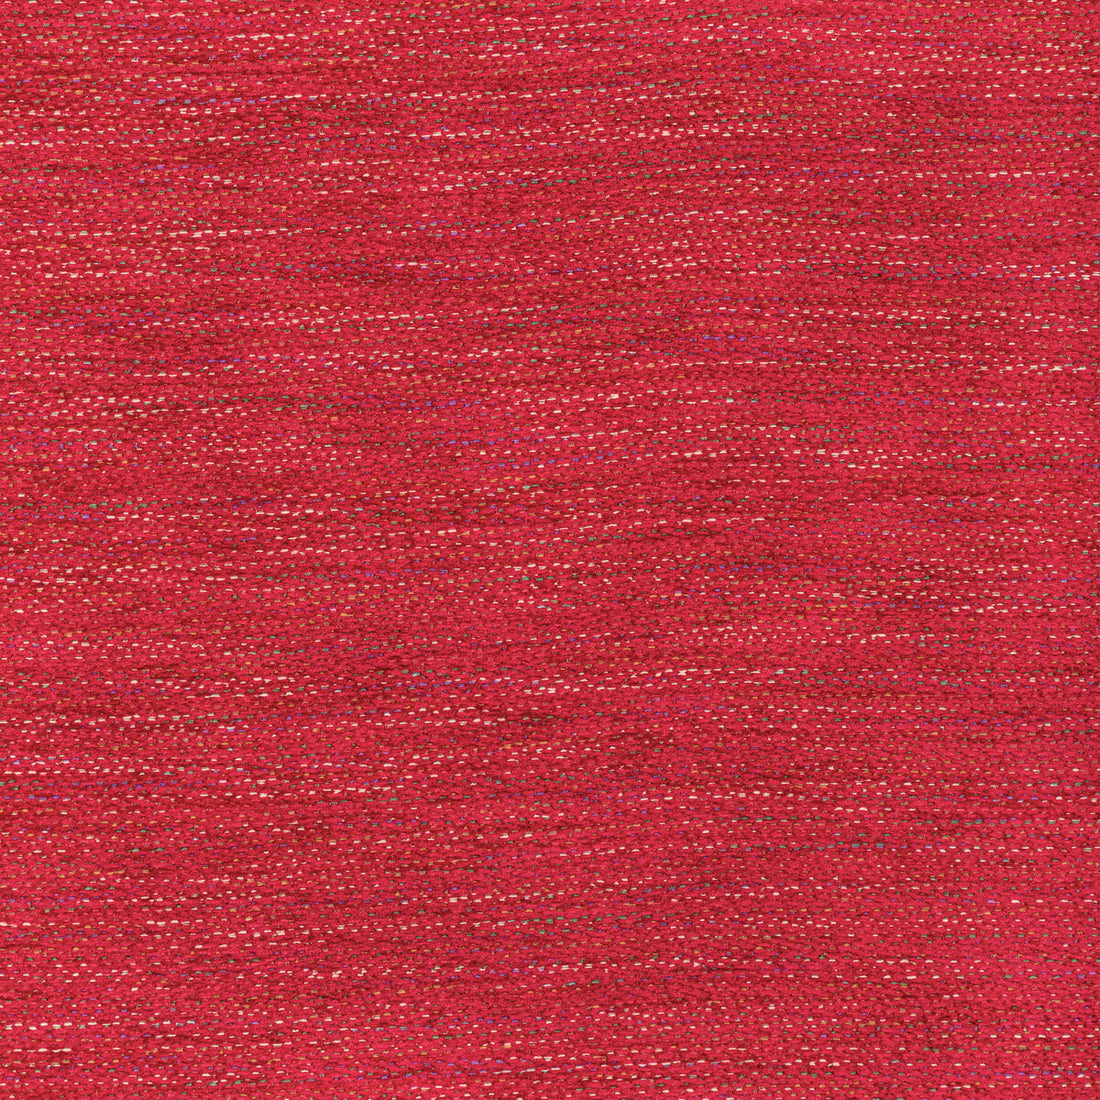 Roberty Texture fabric in red color - pattern 8022127.19.0 - by Brunschwig &amp; Fils in the Chambery Textures III collection